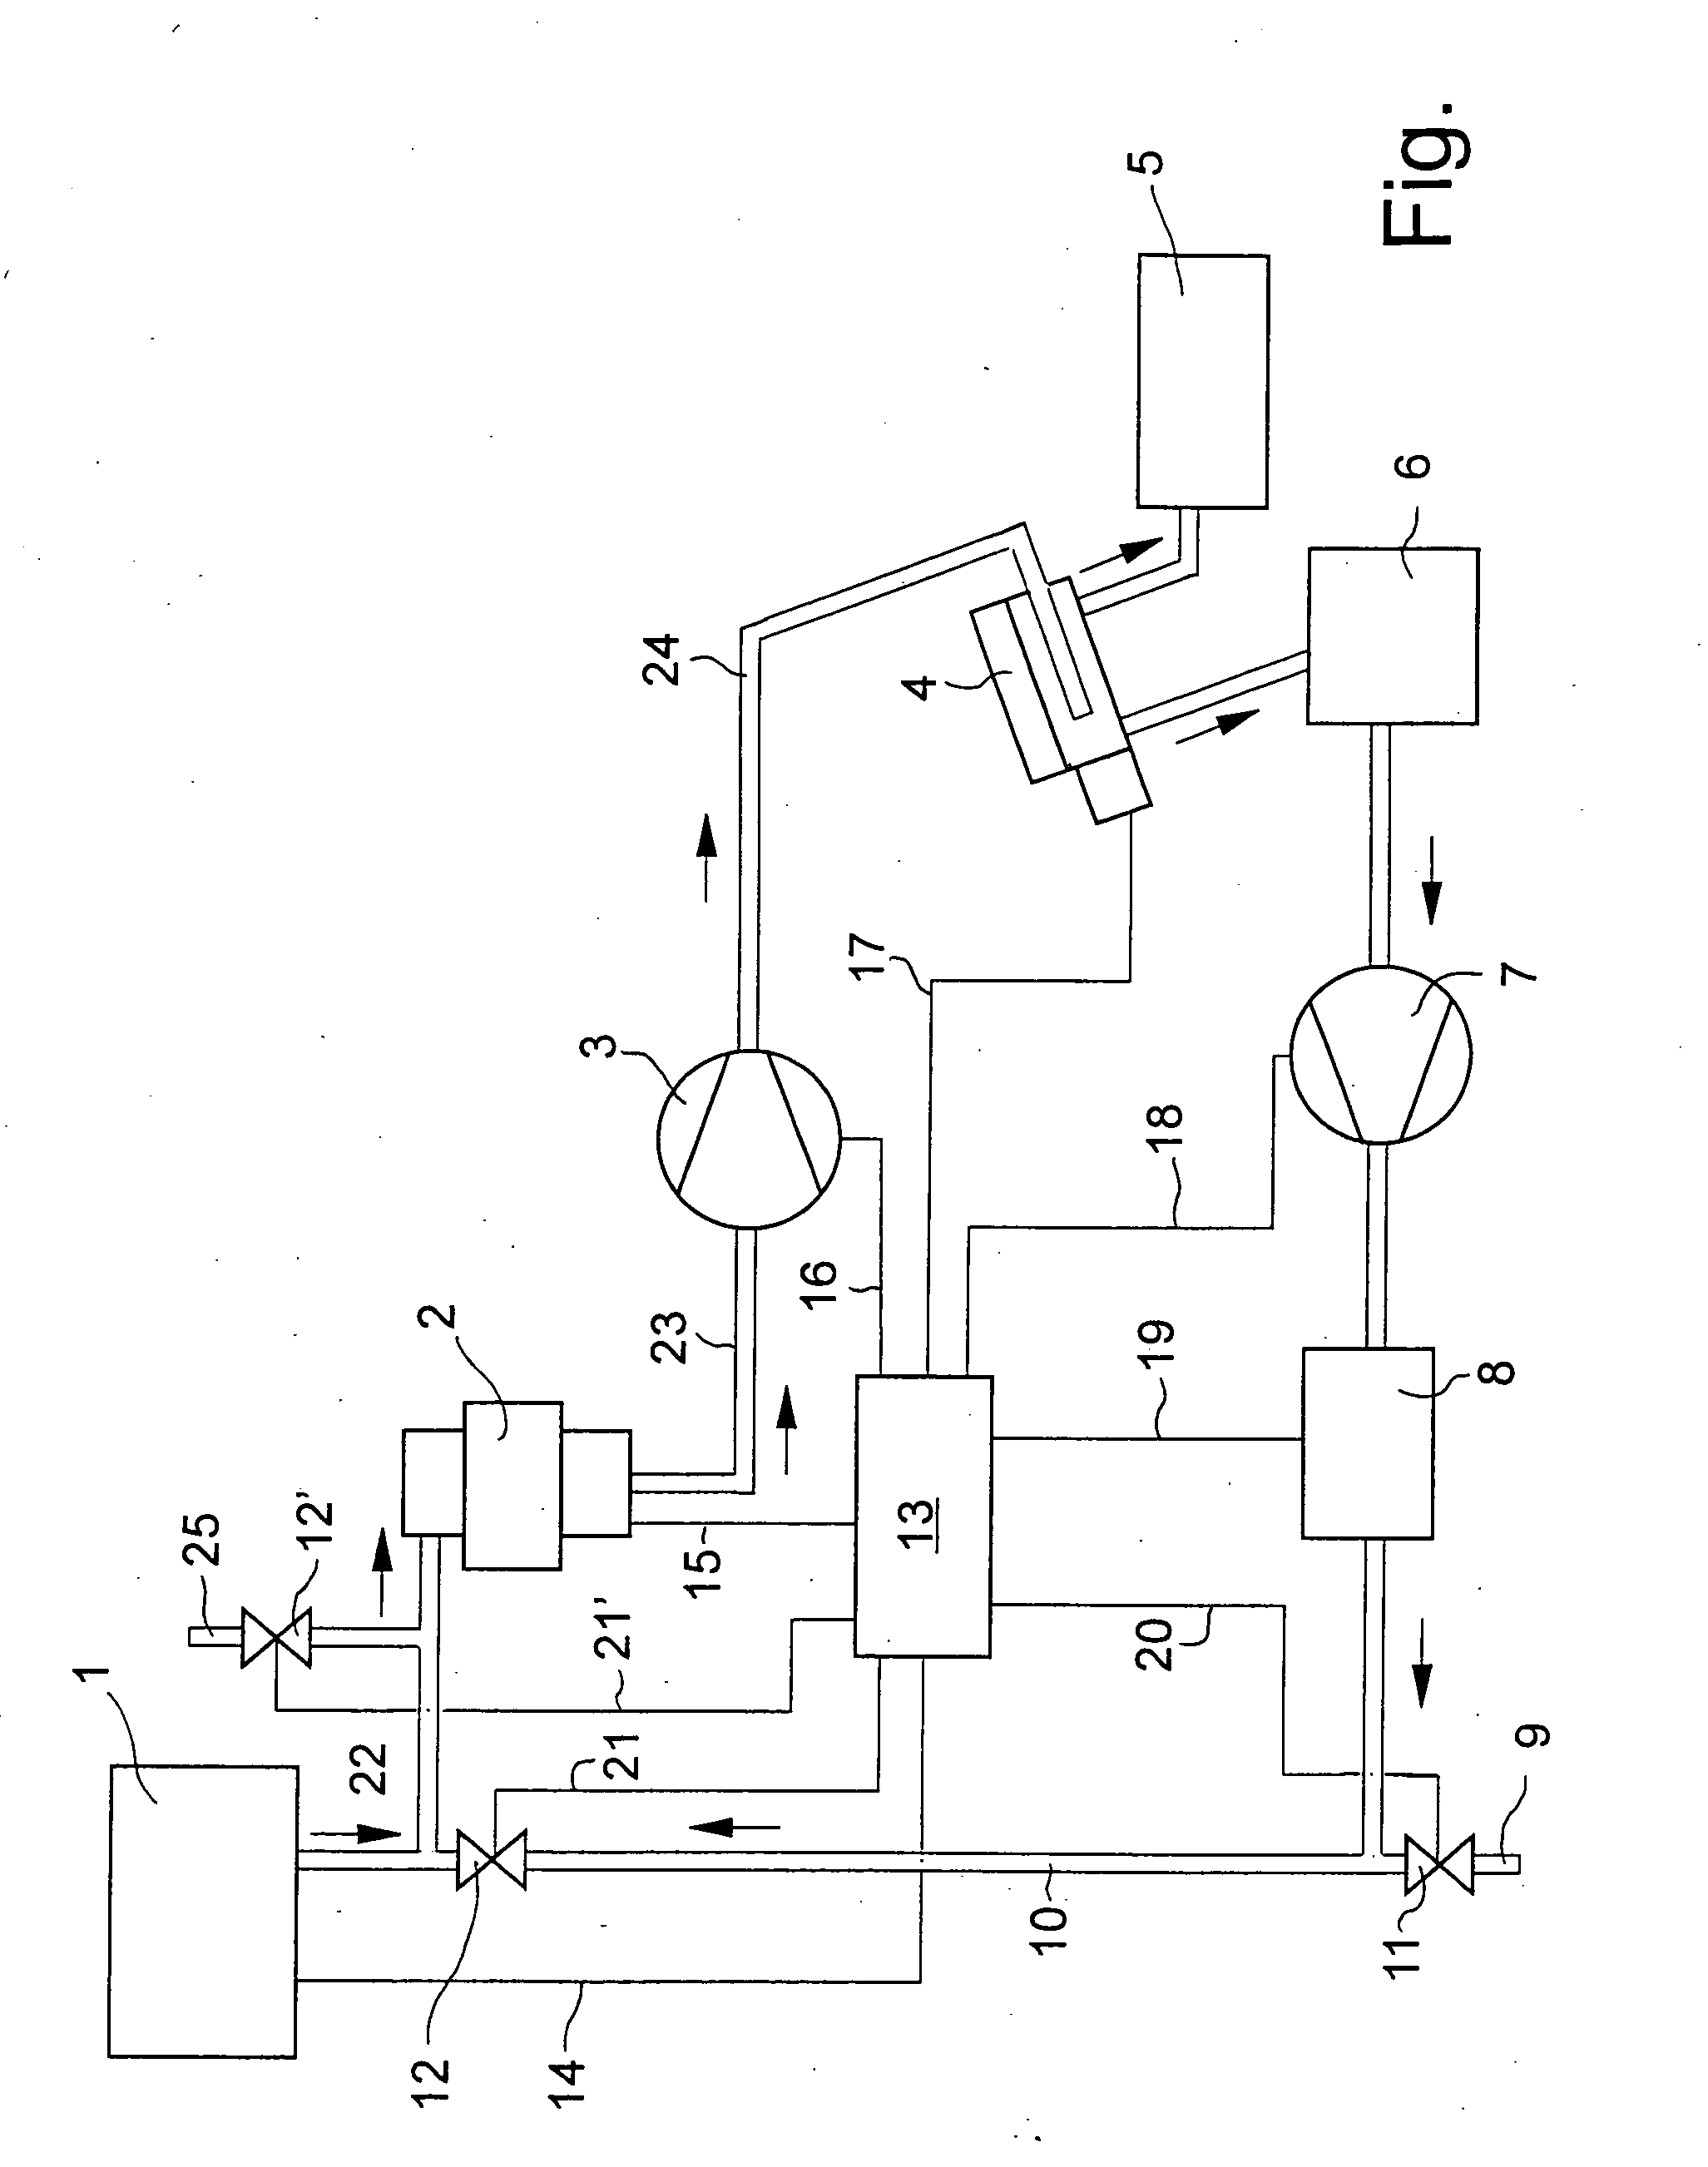 Method and device for processing biowaste